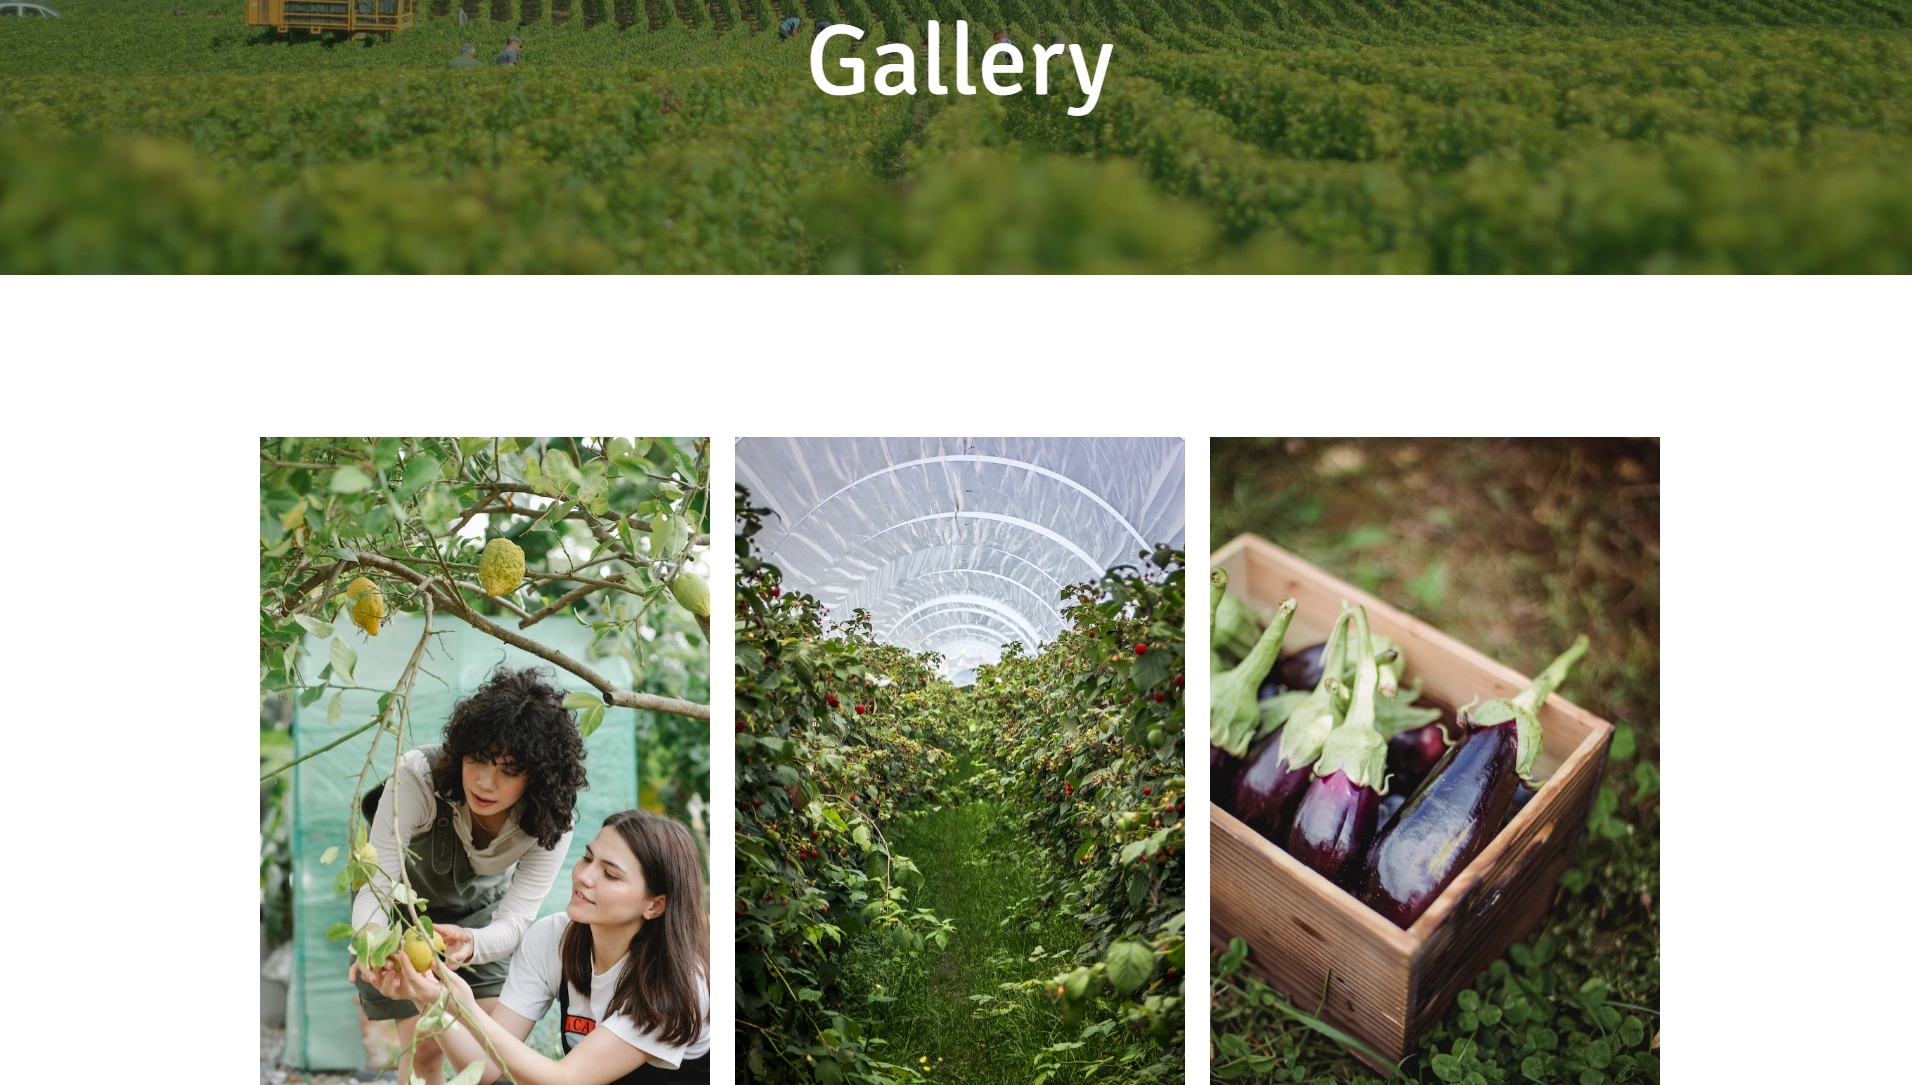 Gallery page